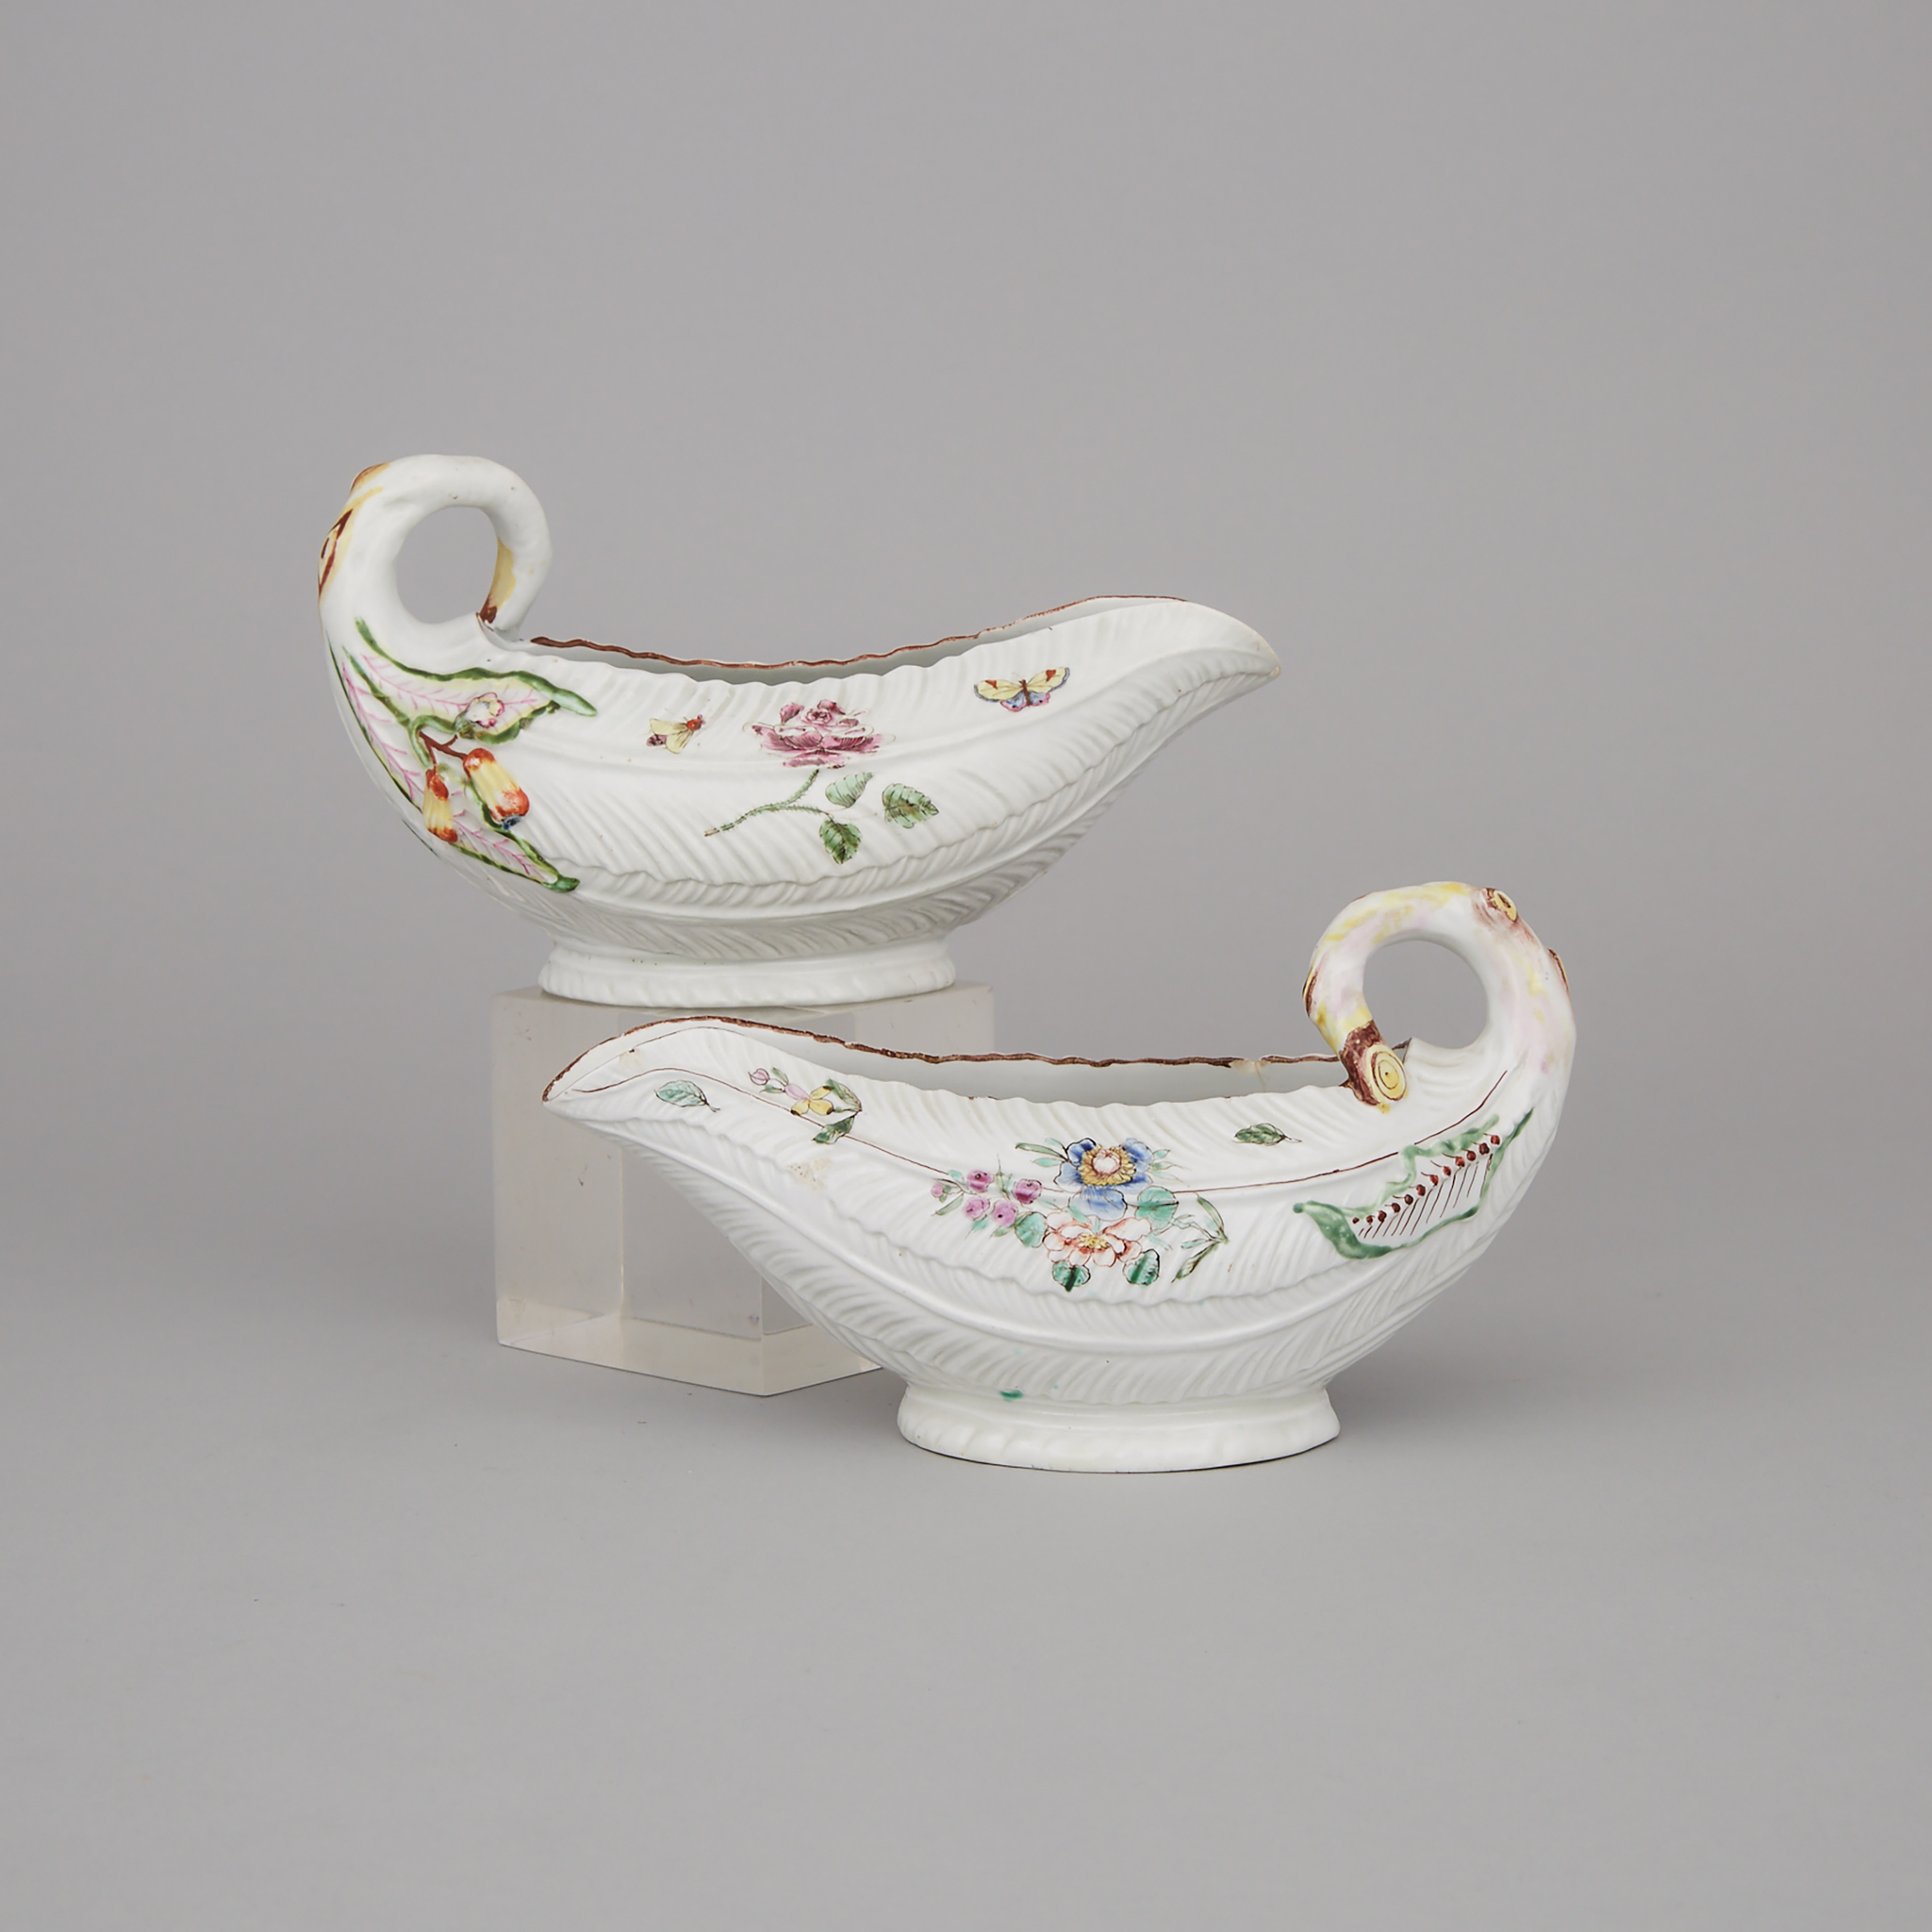 Pair of Worcester Cos Lettuce Leaf Sauce Boats, c.1755-60